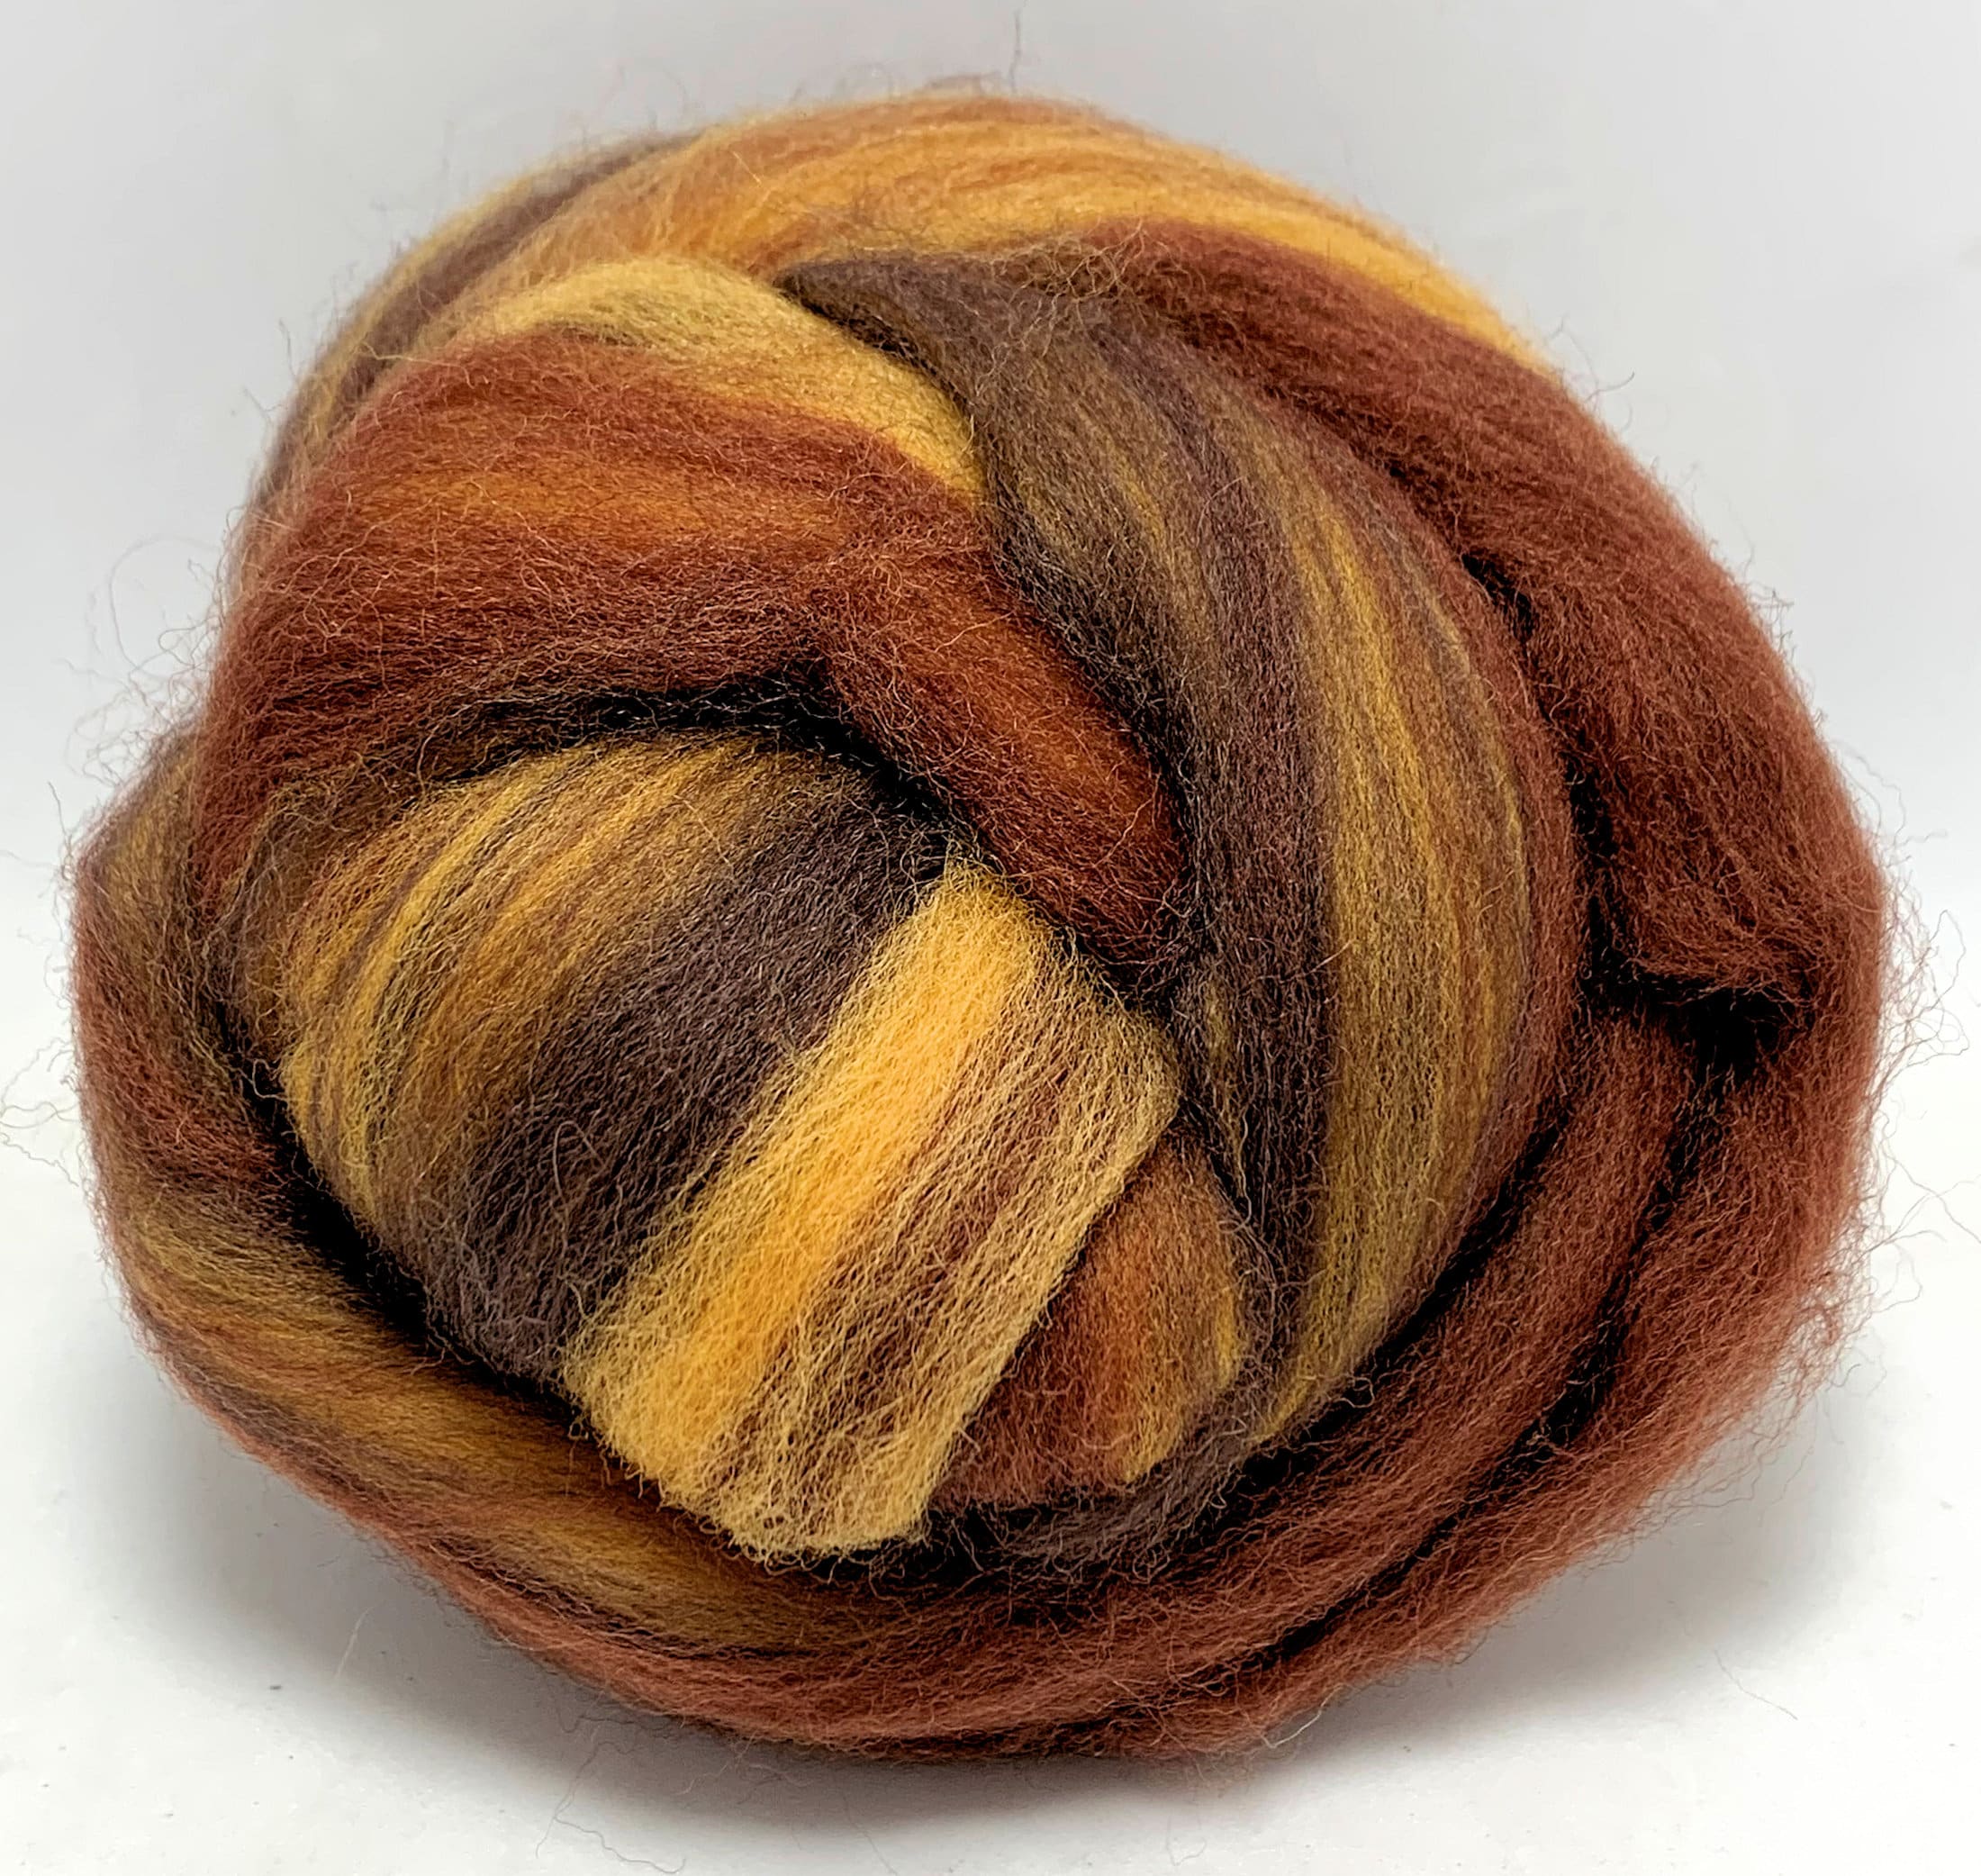 Needle Felting Wool, Neutral Colors, Local Wool for Felting